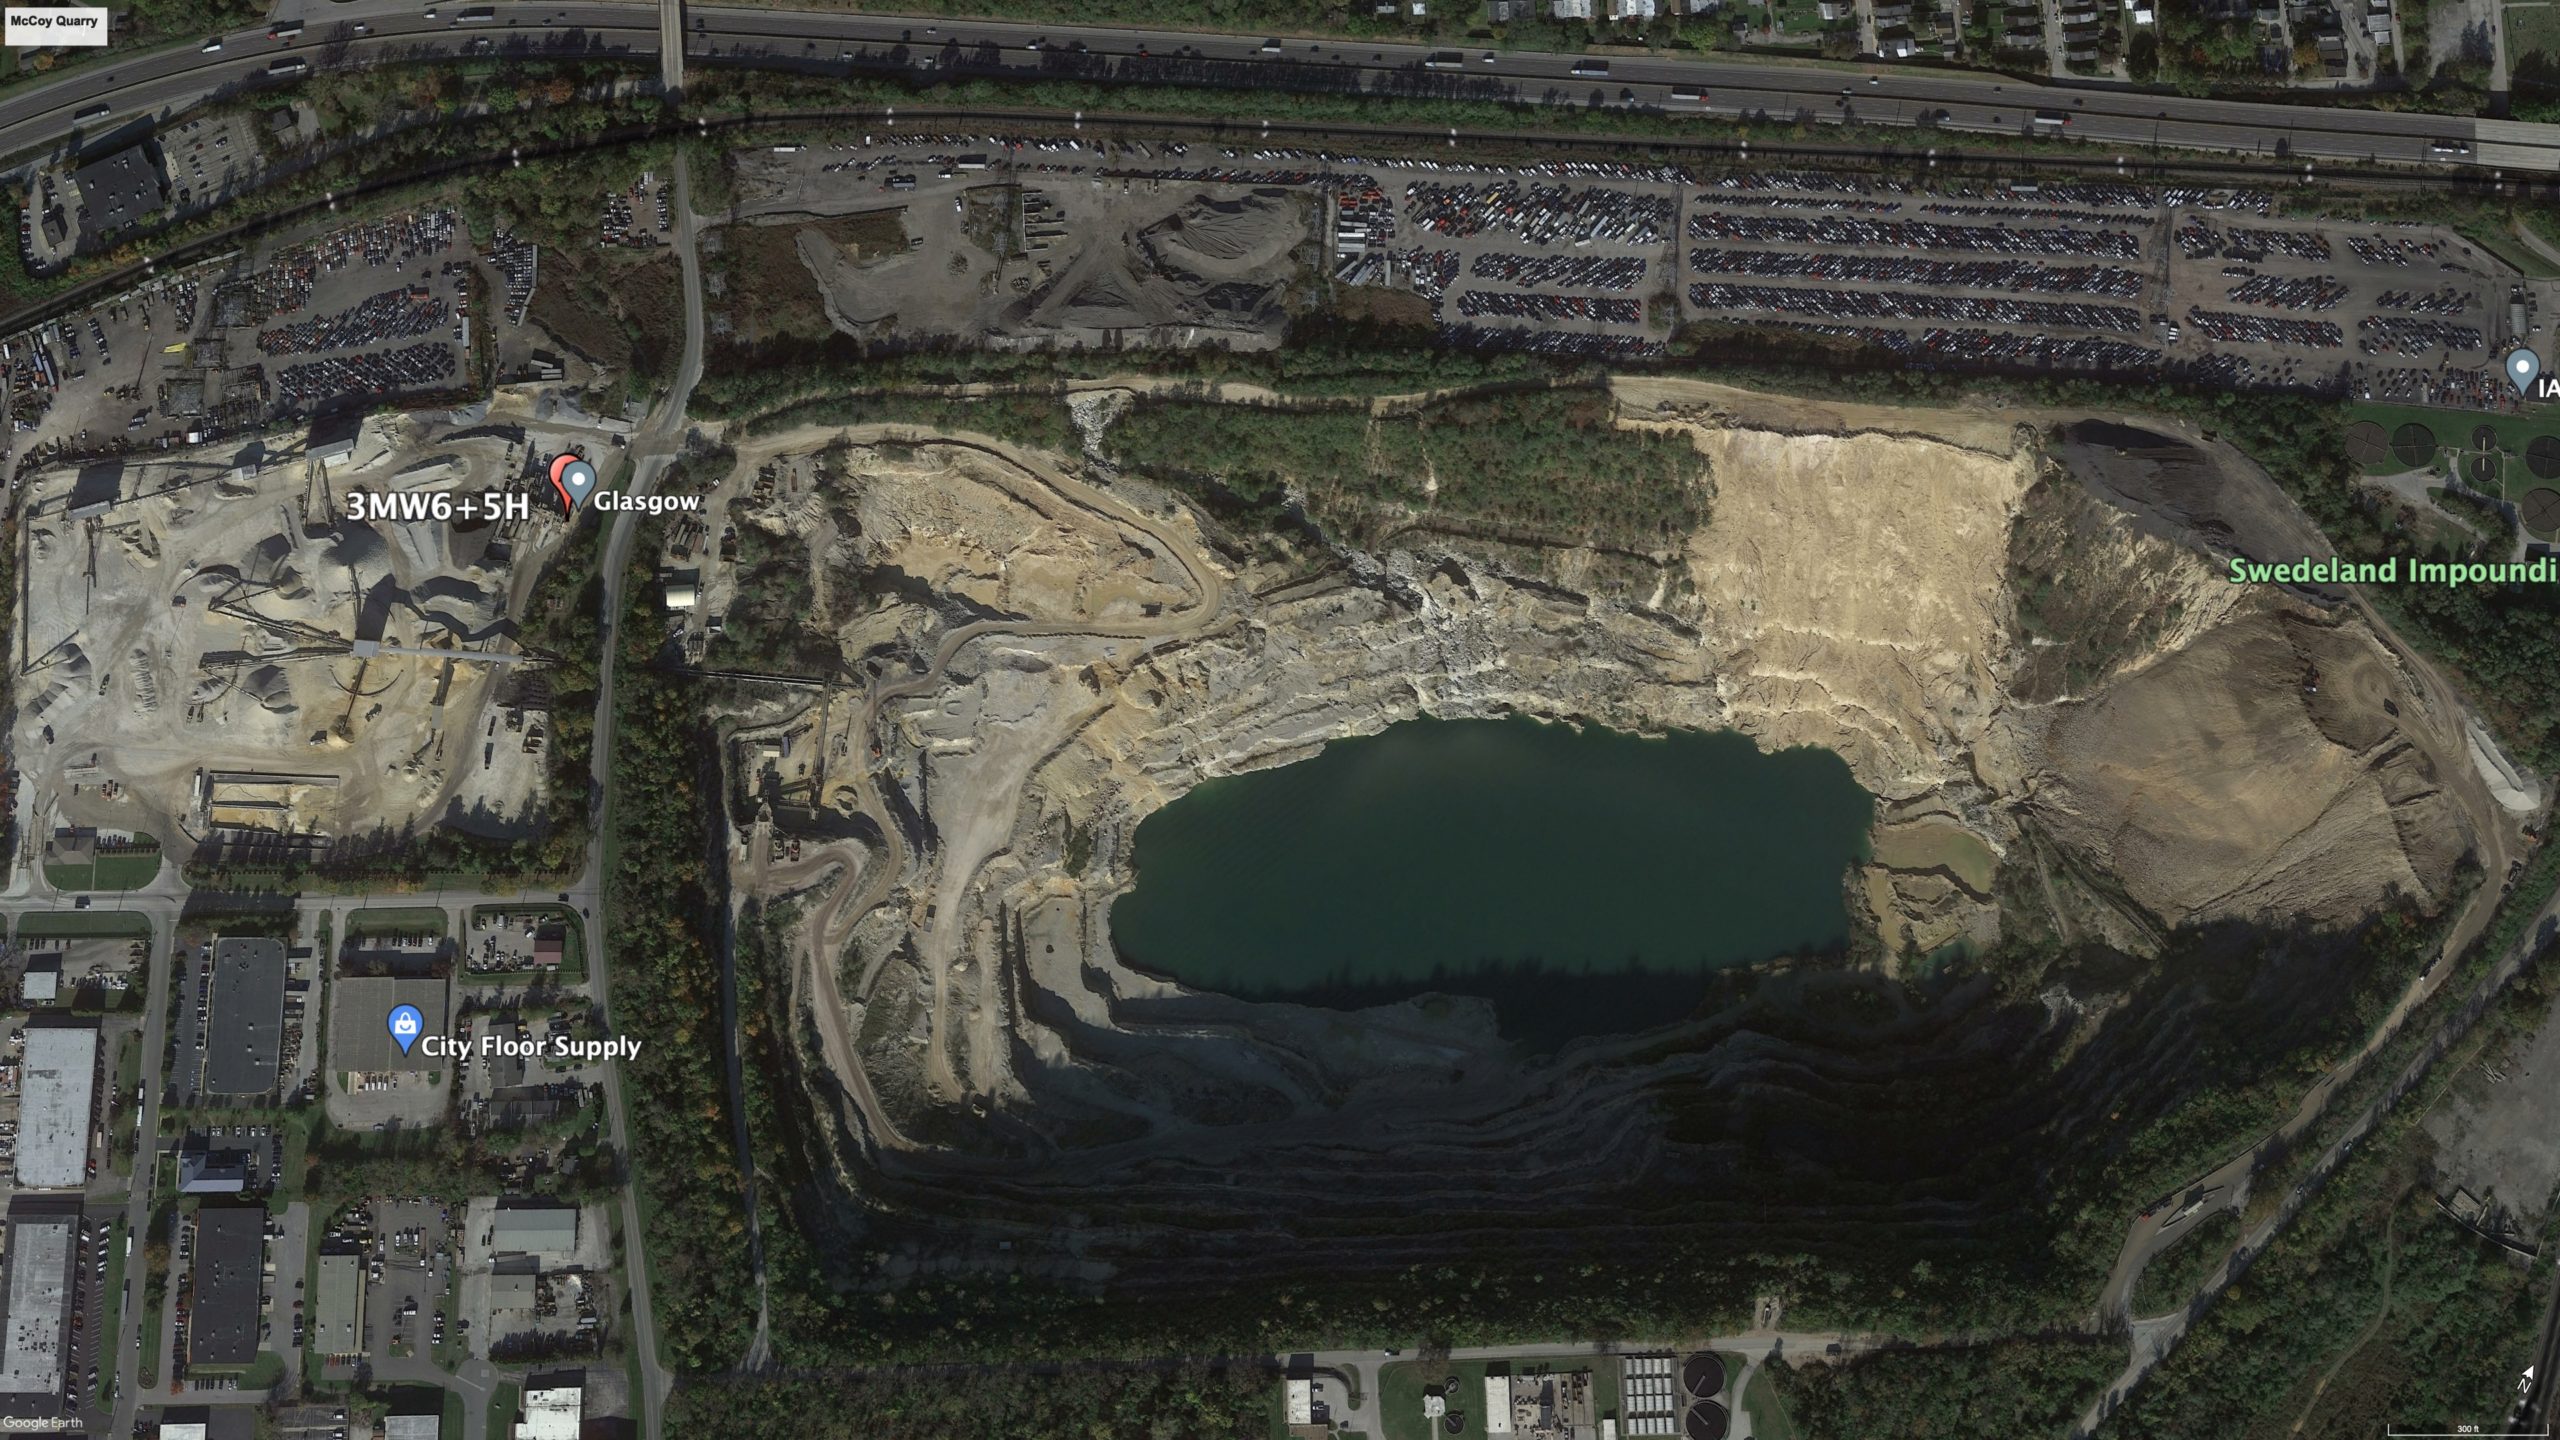 A Google Earth image of a quarry surrounded by an urban area.